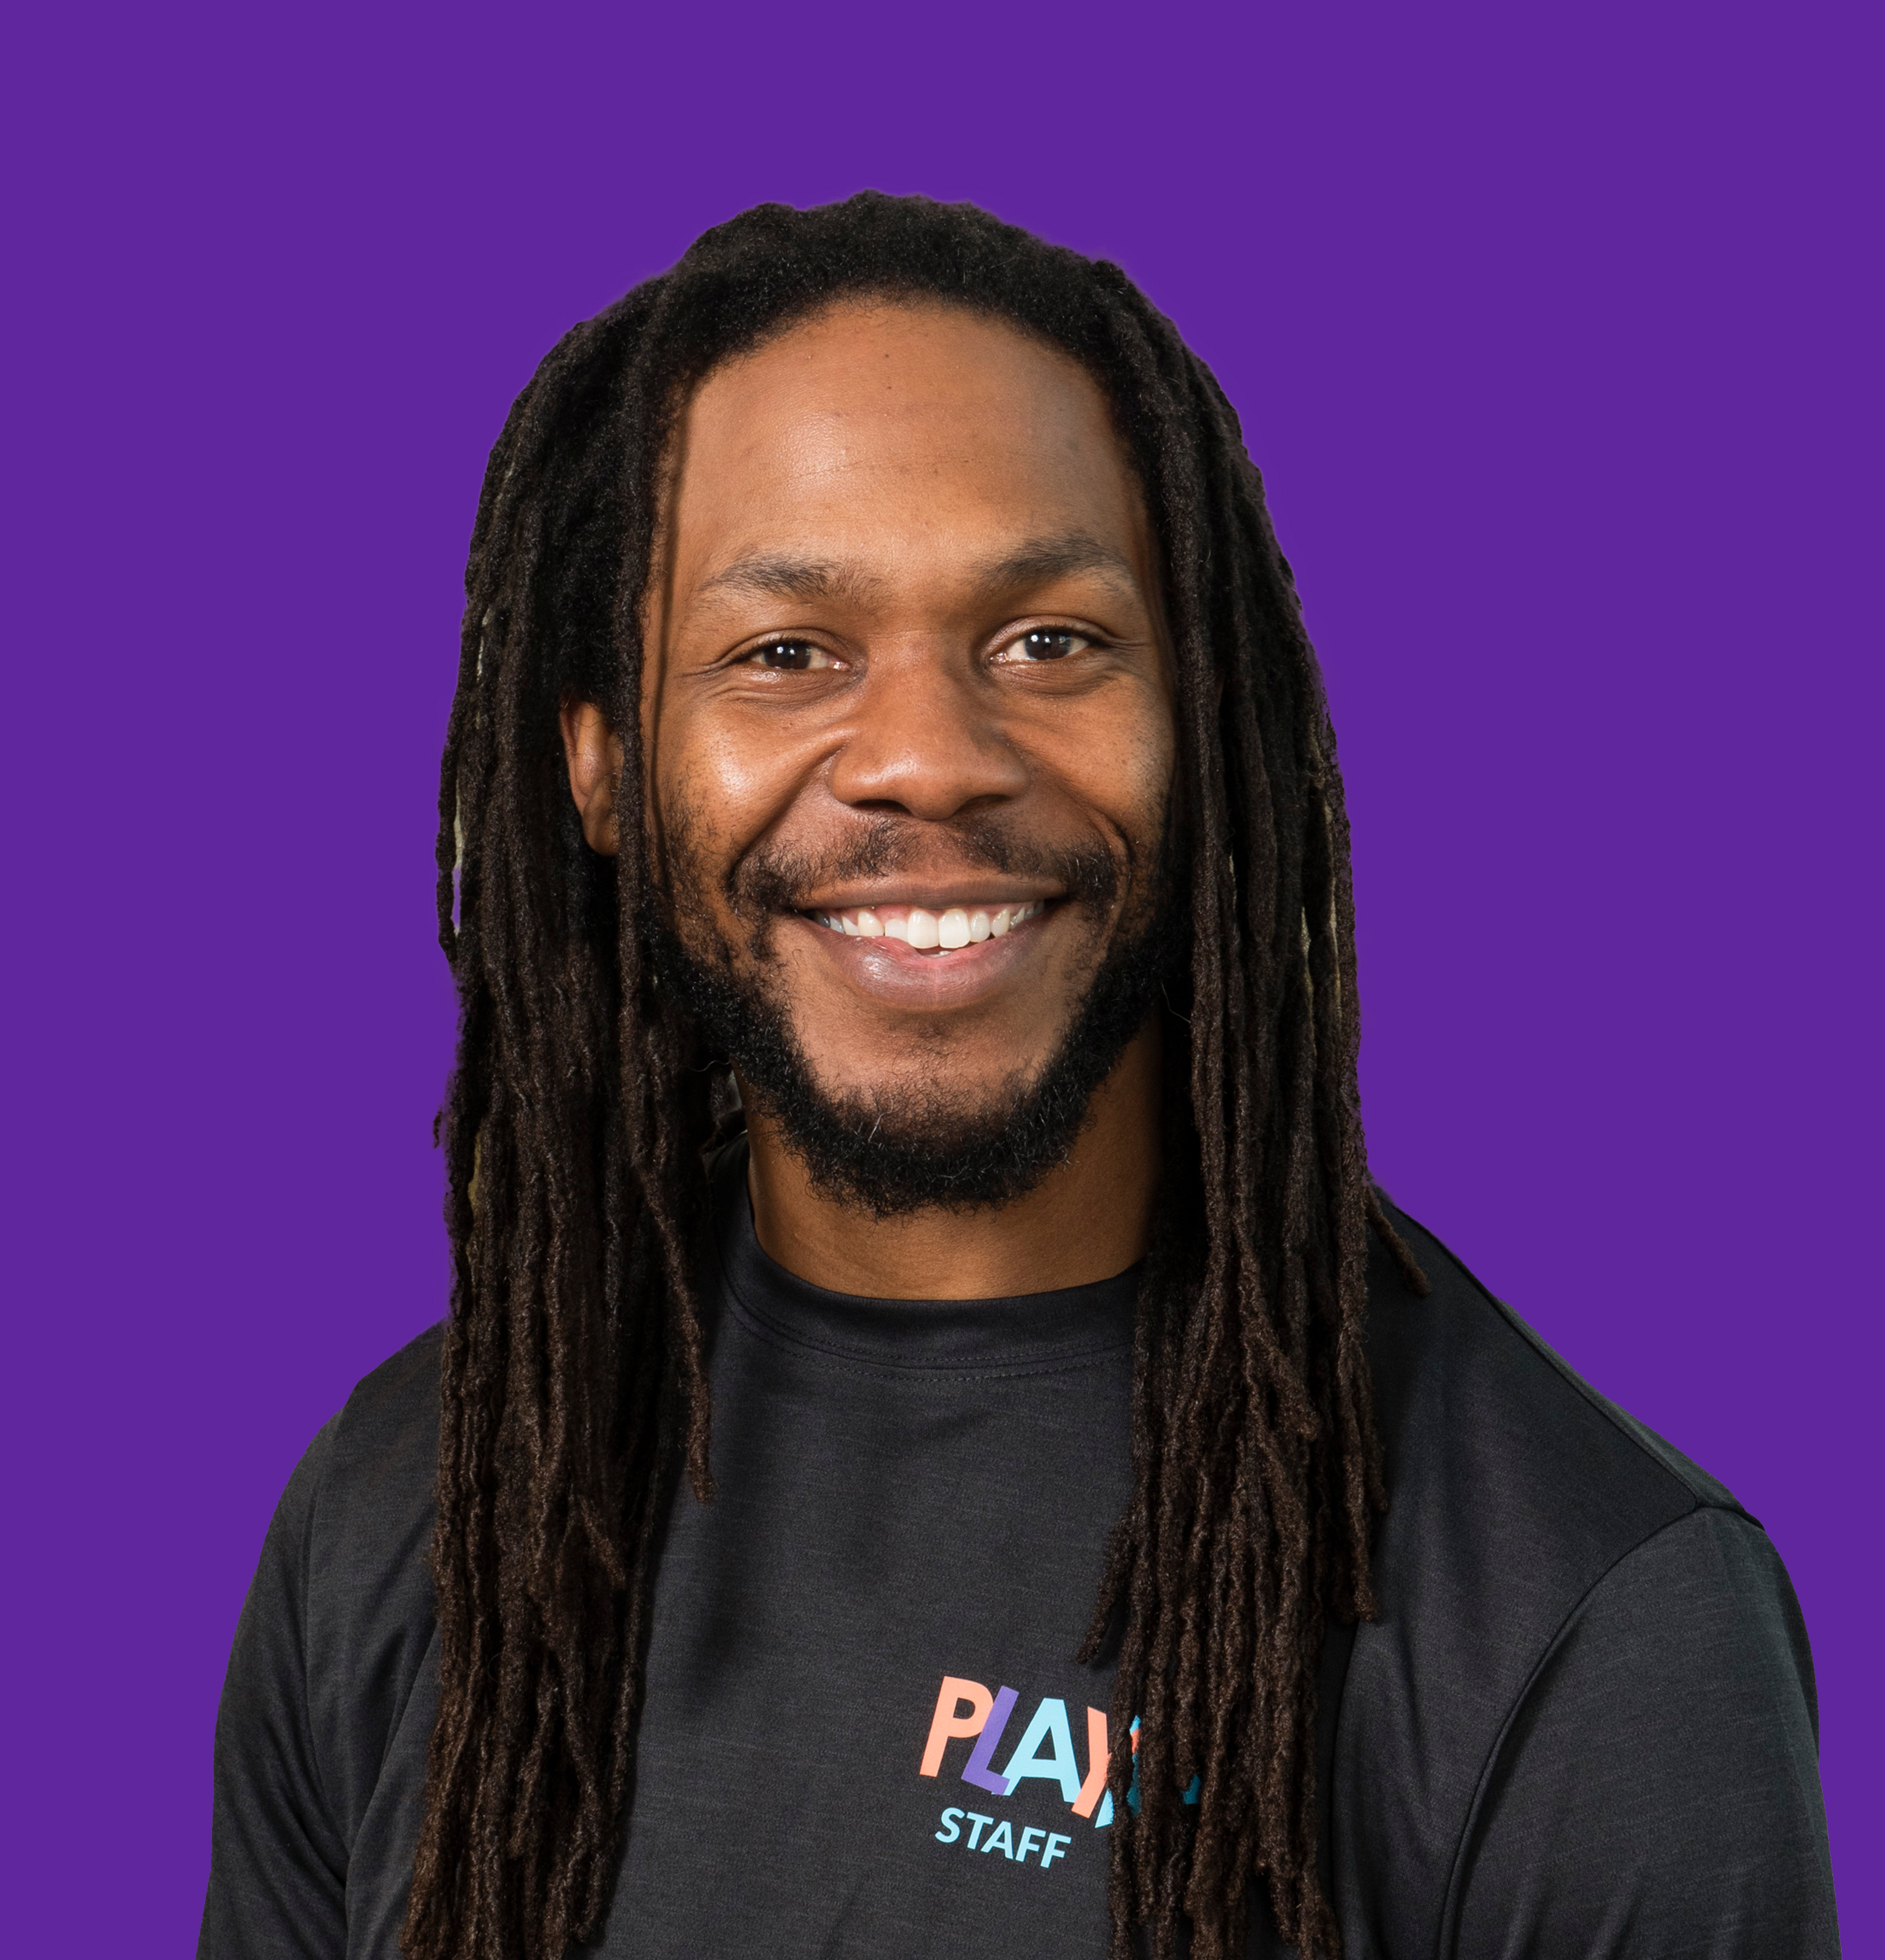 Head shot of Curtis on a perfect purple background.